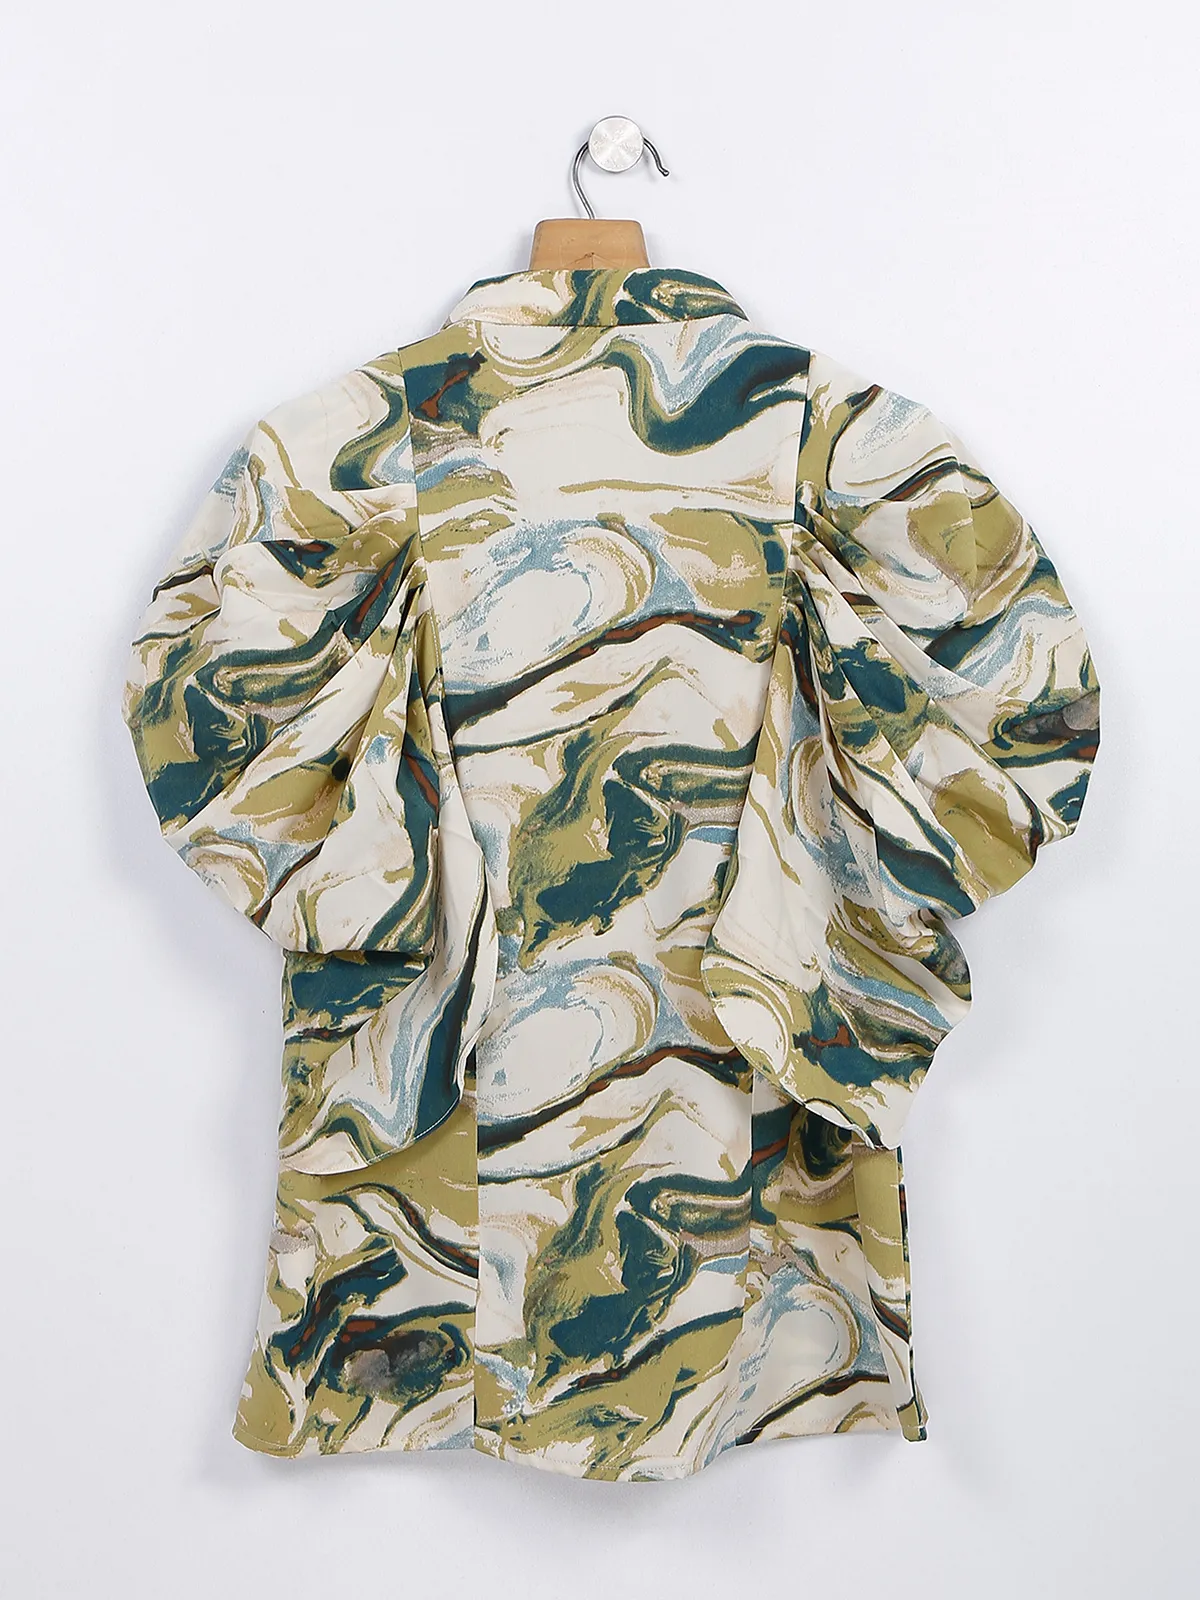 Olive printed rayon cotton top